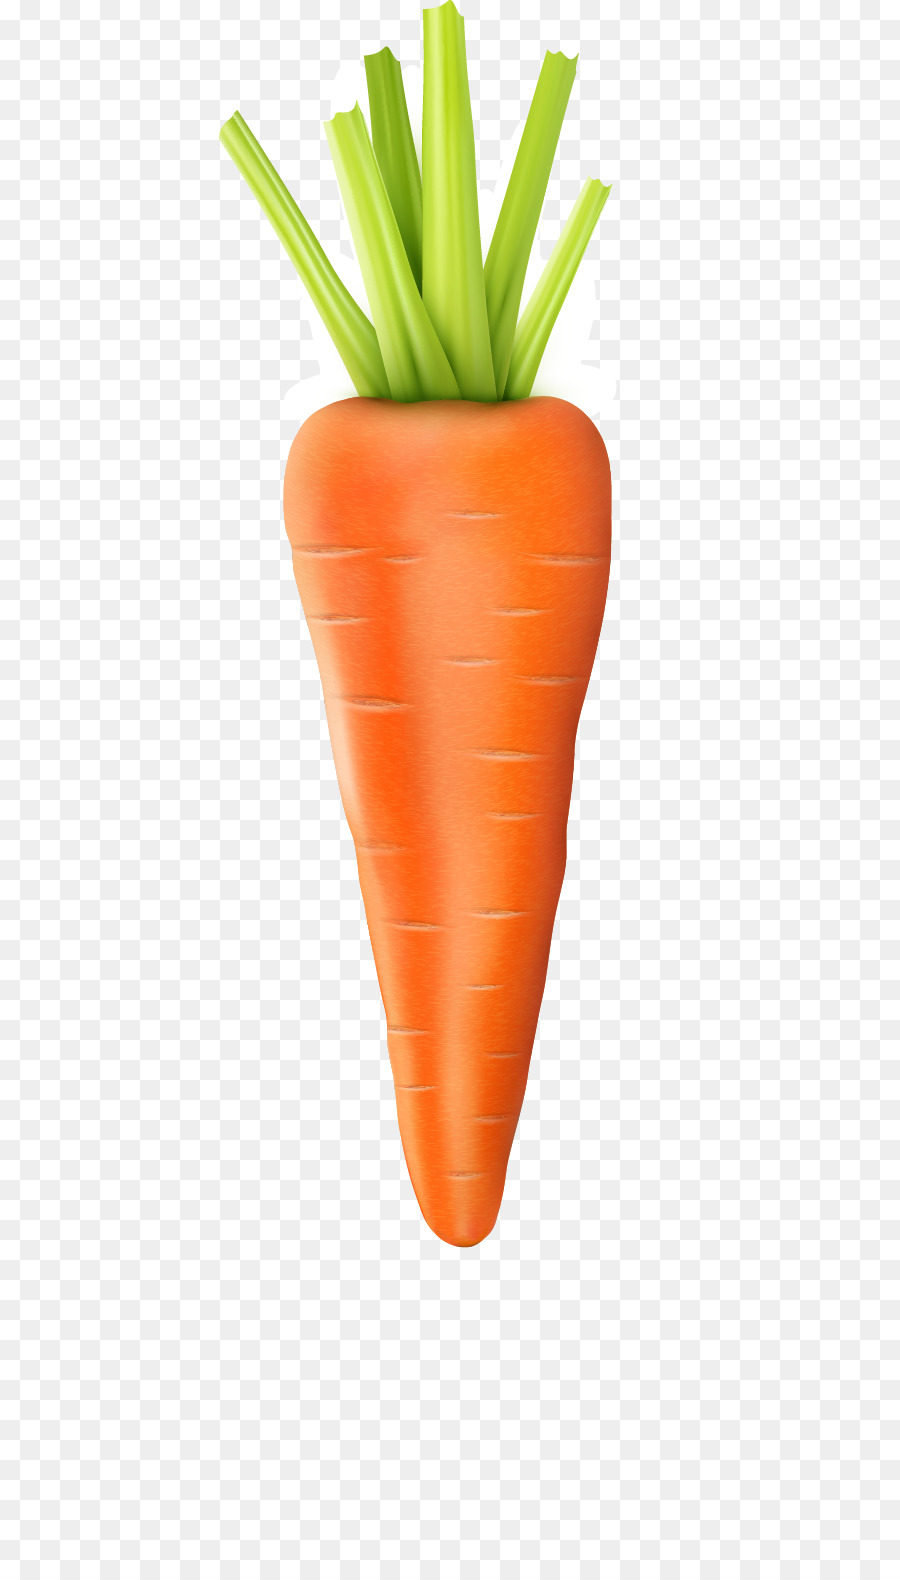 Baby carrot Vegetable - Vector carrot png download - 589*1577 - Free Transparent Baby Carrot png Download.